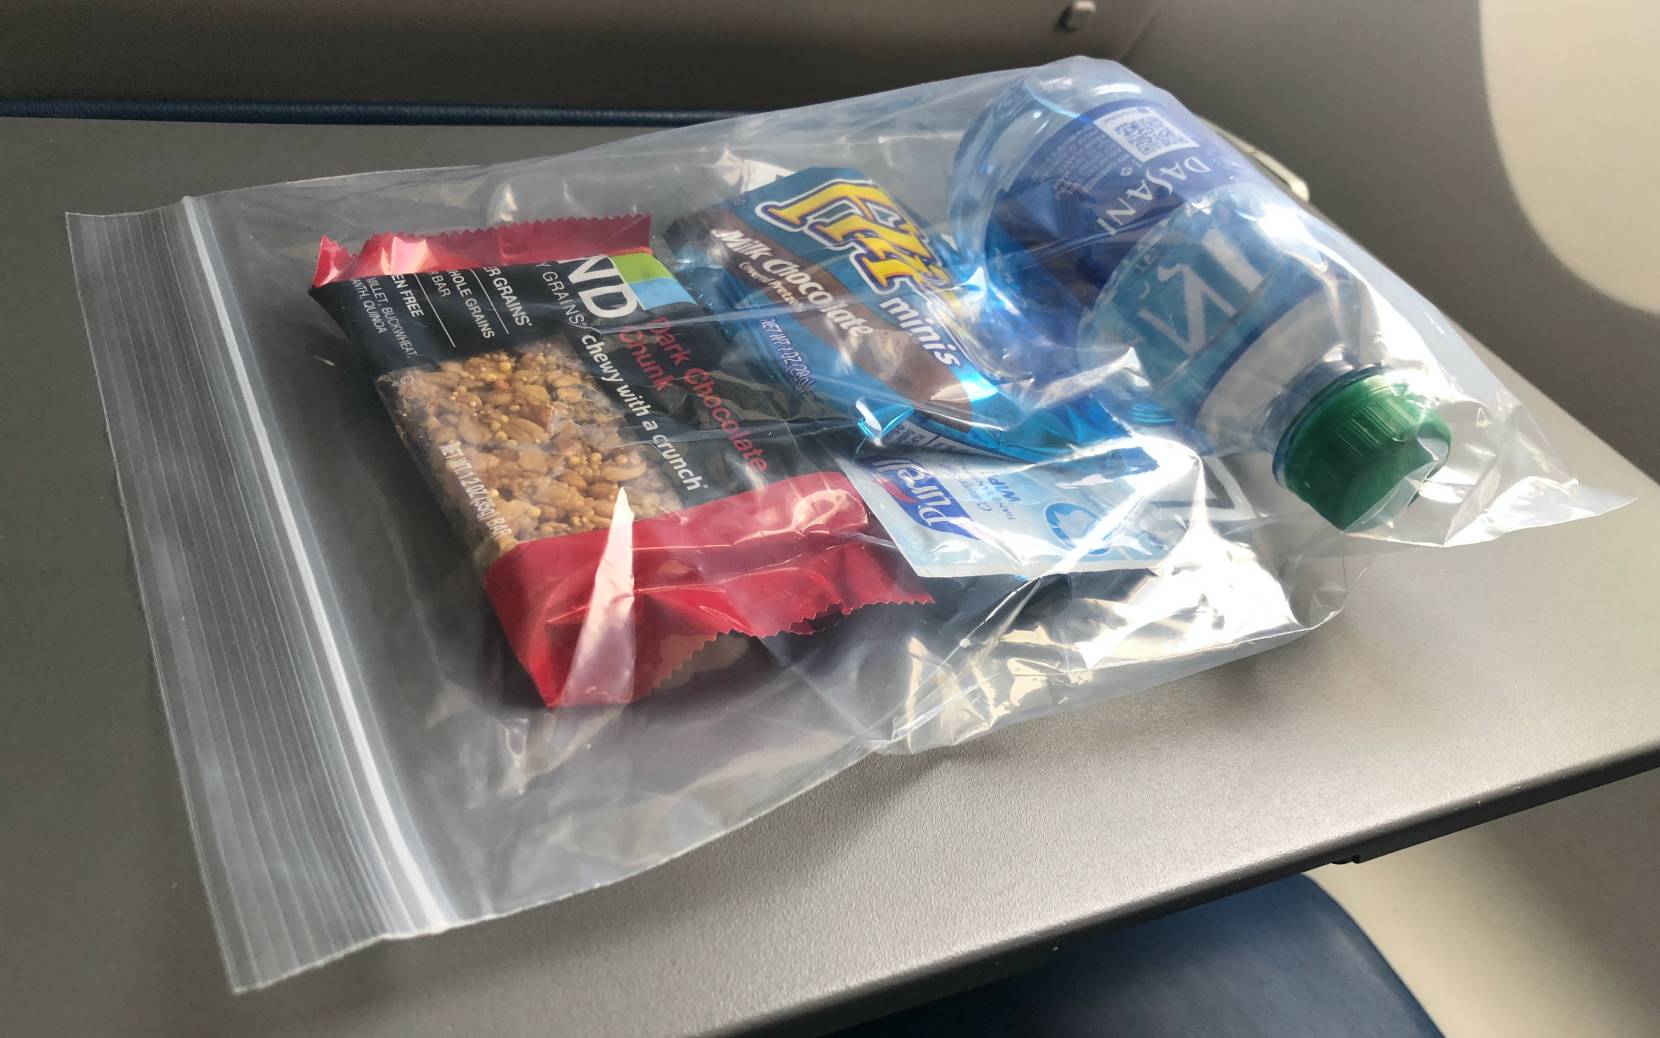 A plastic bag containing a Kind bar, chocolate-dipped pretzels, a bottle of water, and an individual hand sanitizer pack.